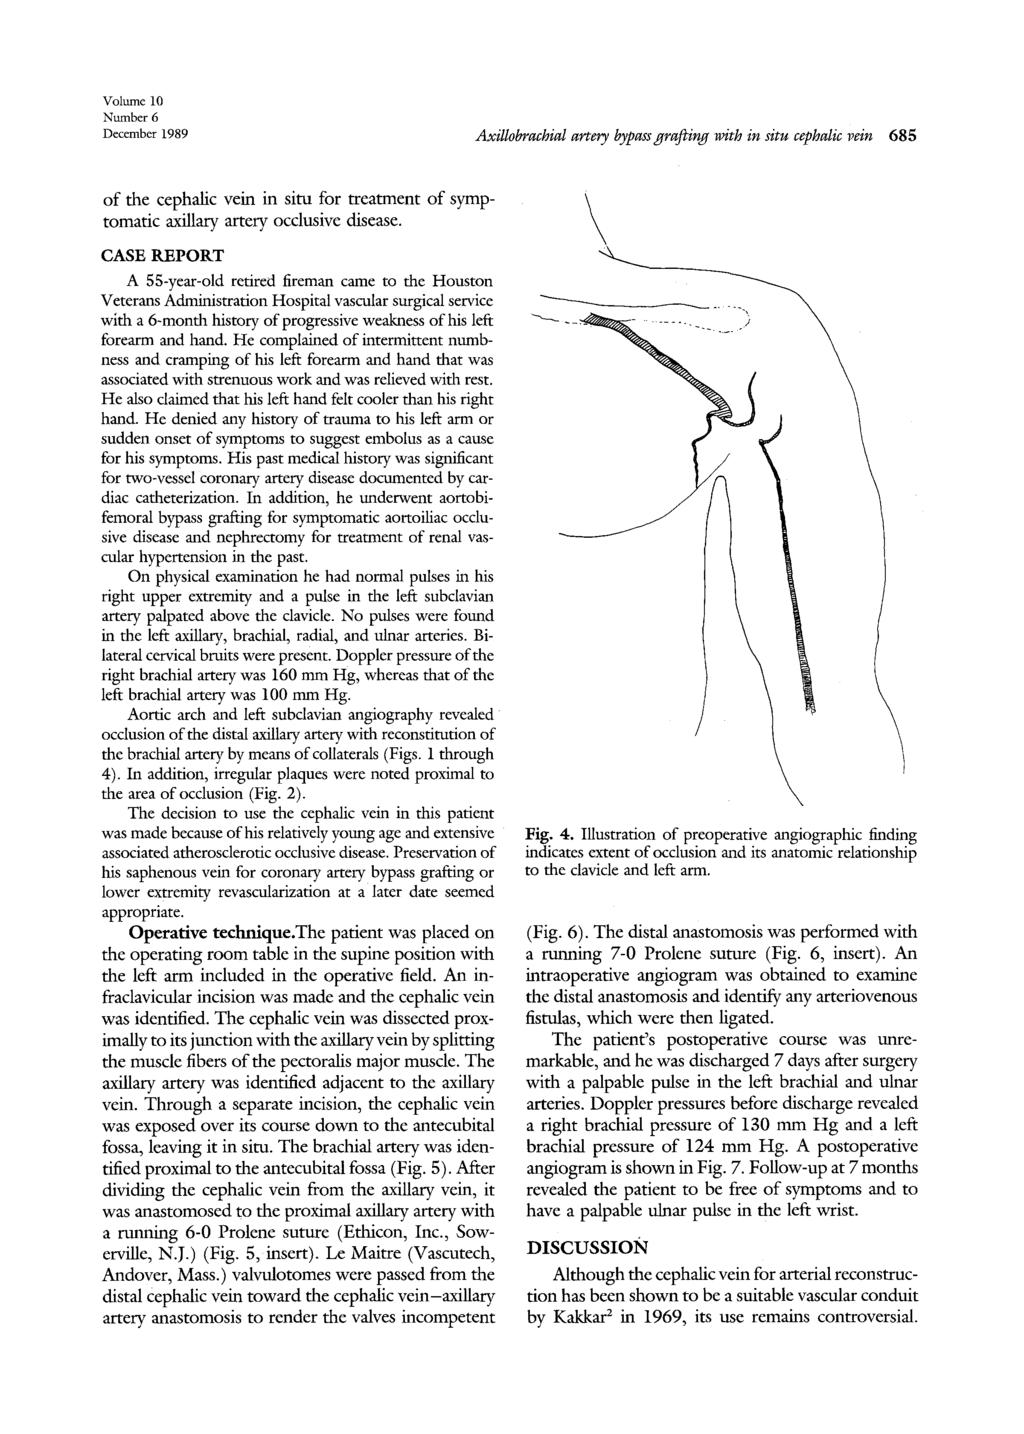 Volume 10 Number 6 December 1989 Axillobrachial artery bypass grafting with in situ cephalic vein 685 of the cephalic vein in situ for treatment of symptomatic axillary artery occlusive disease.